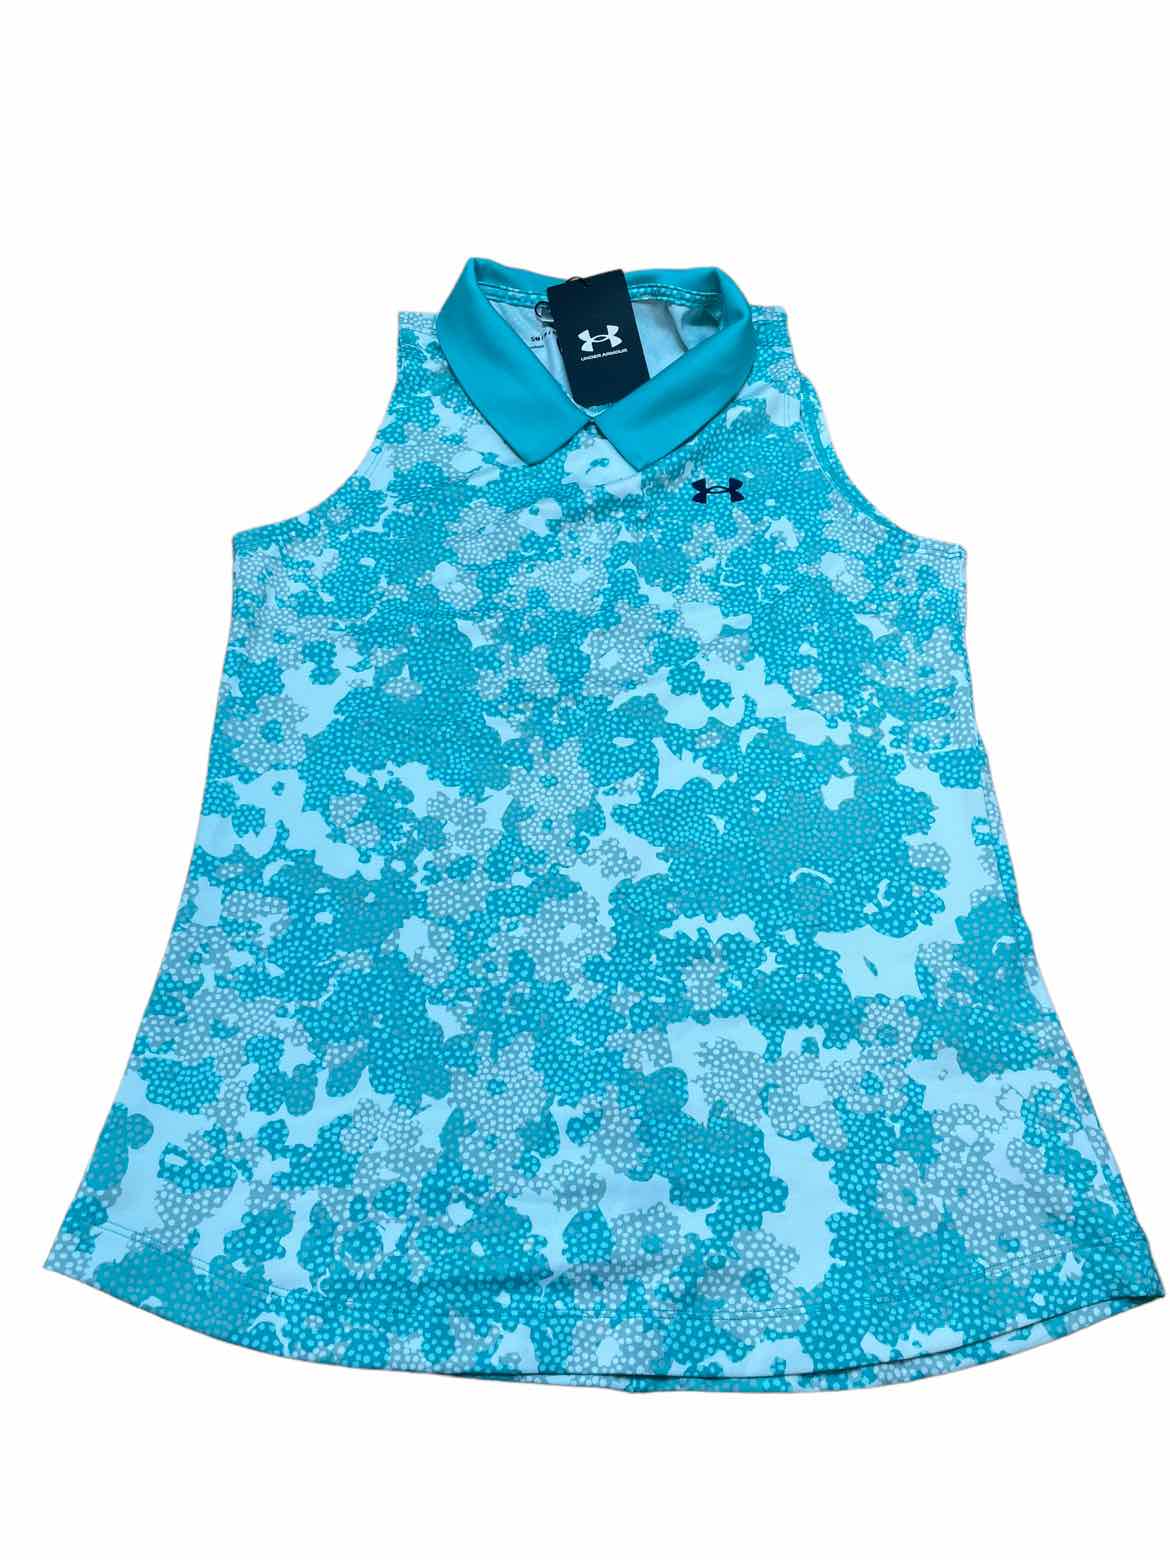 Under Armour Size S Aqua Polyester Camoflage Active Wear Shirt